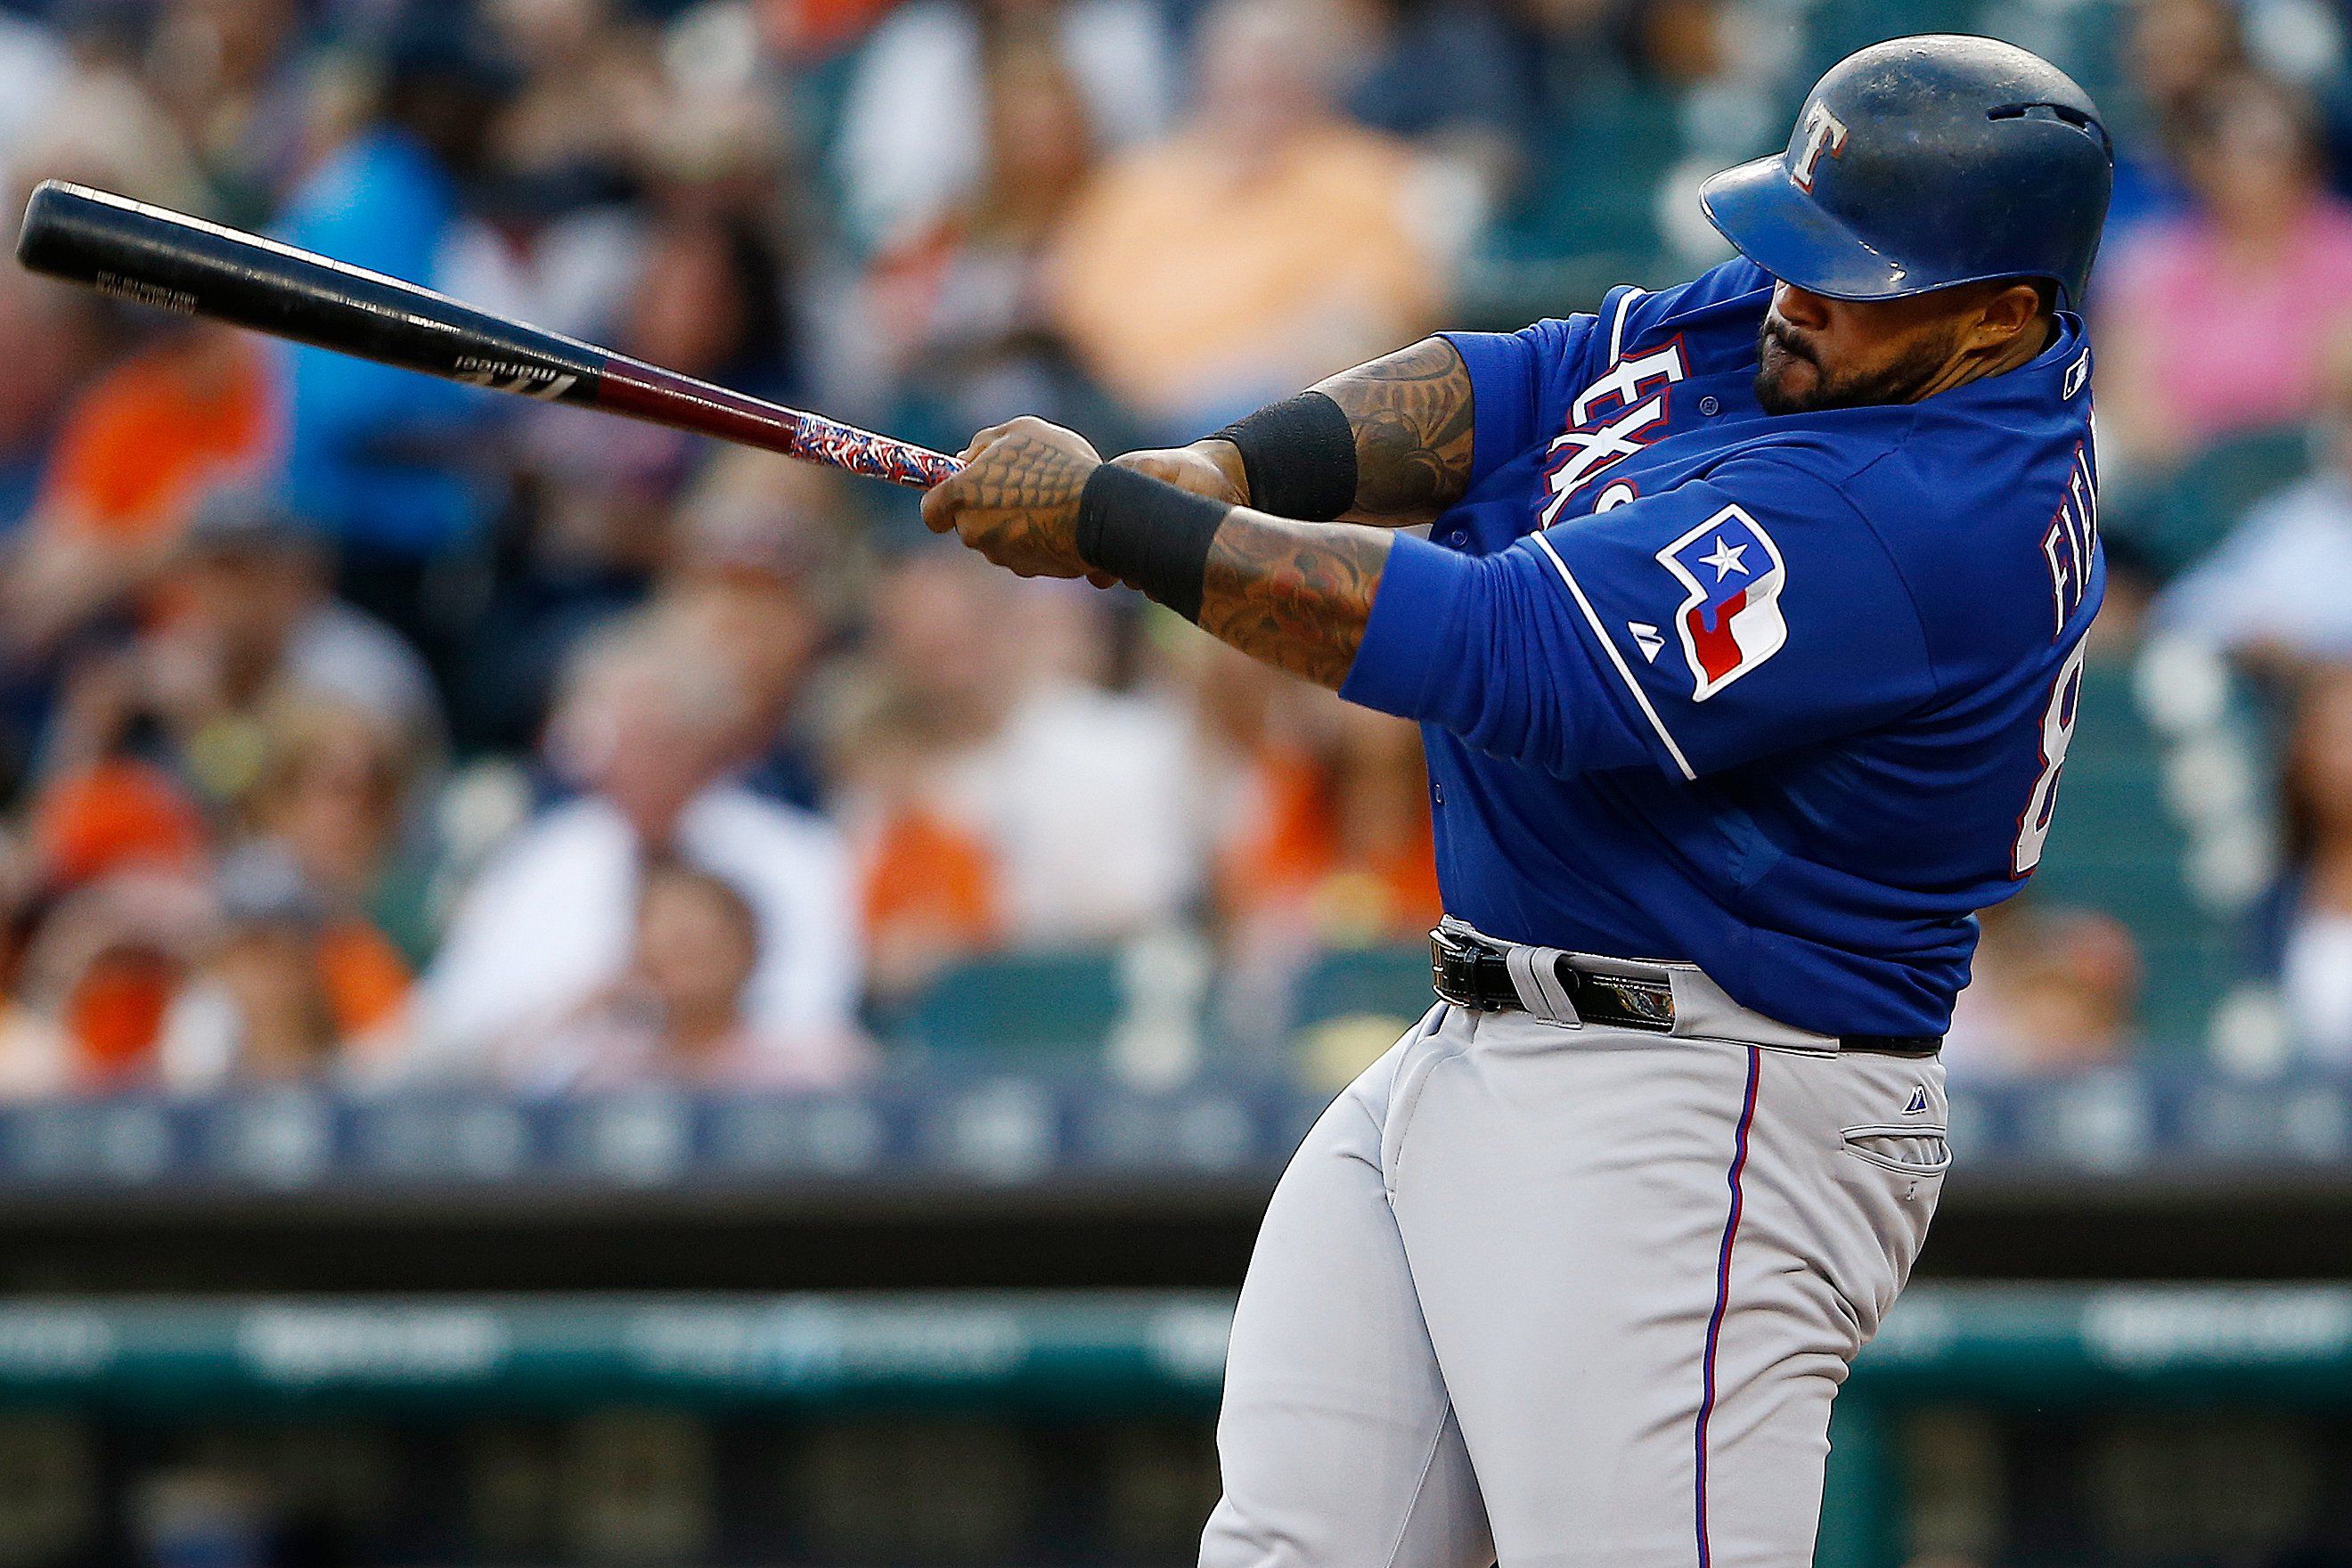 Prince Fielder agrees to sign with Detroit Tigers